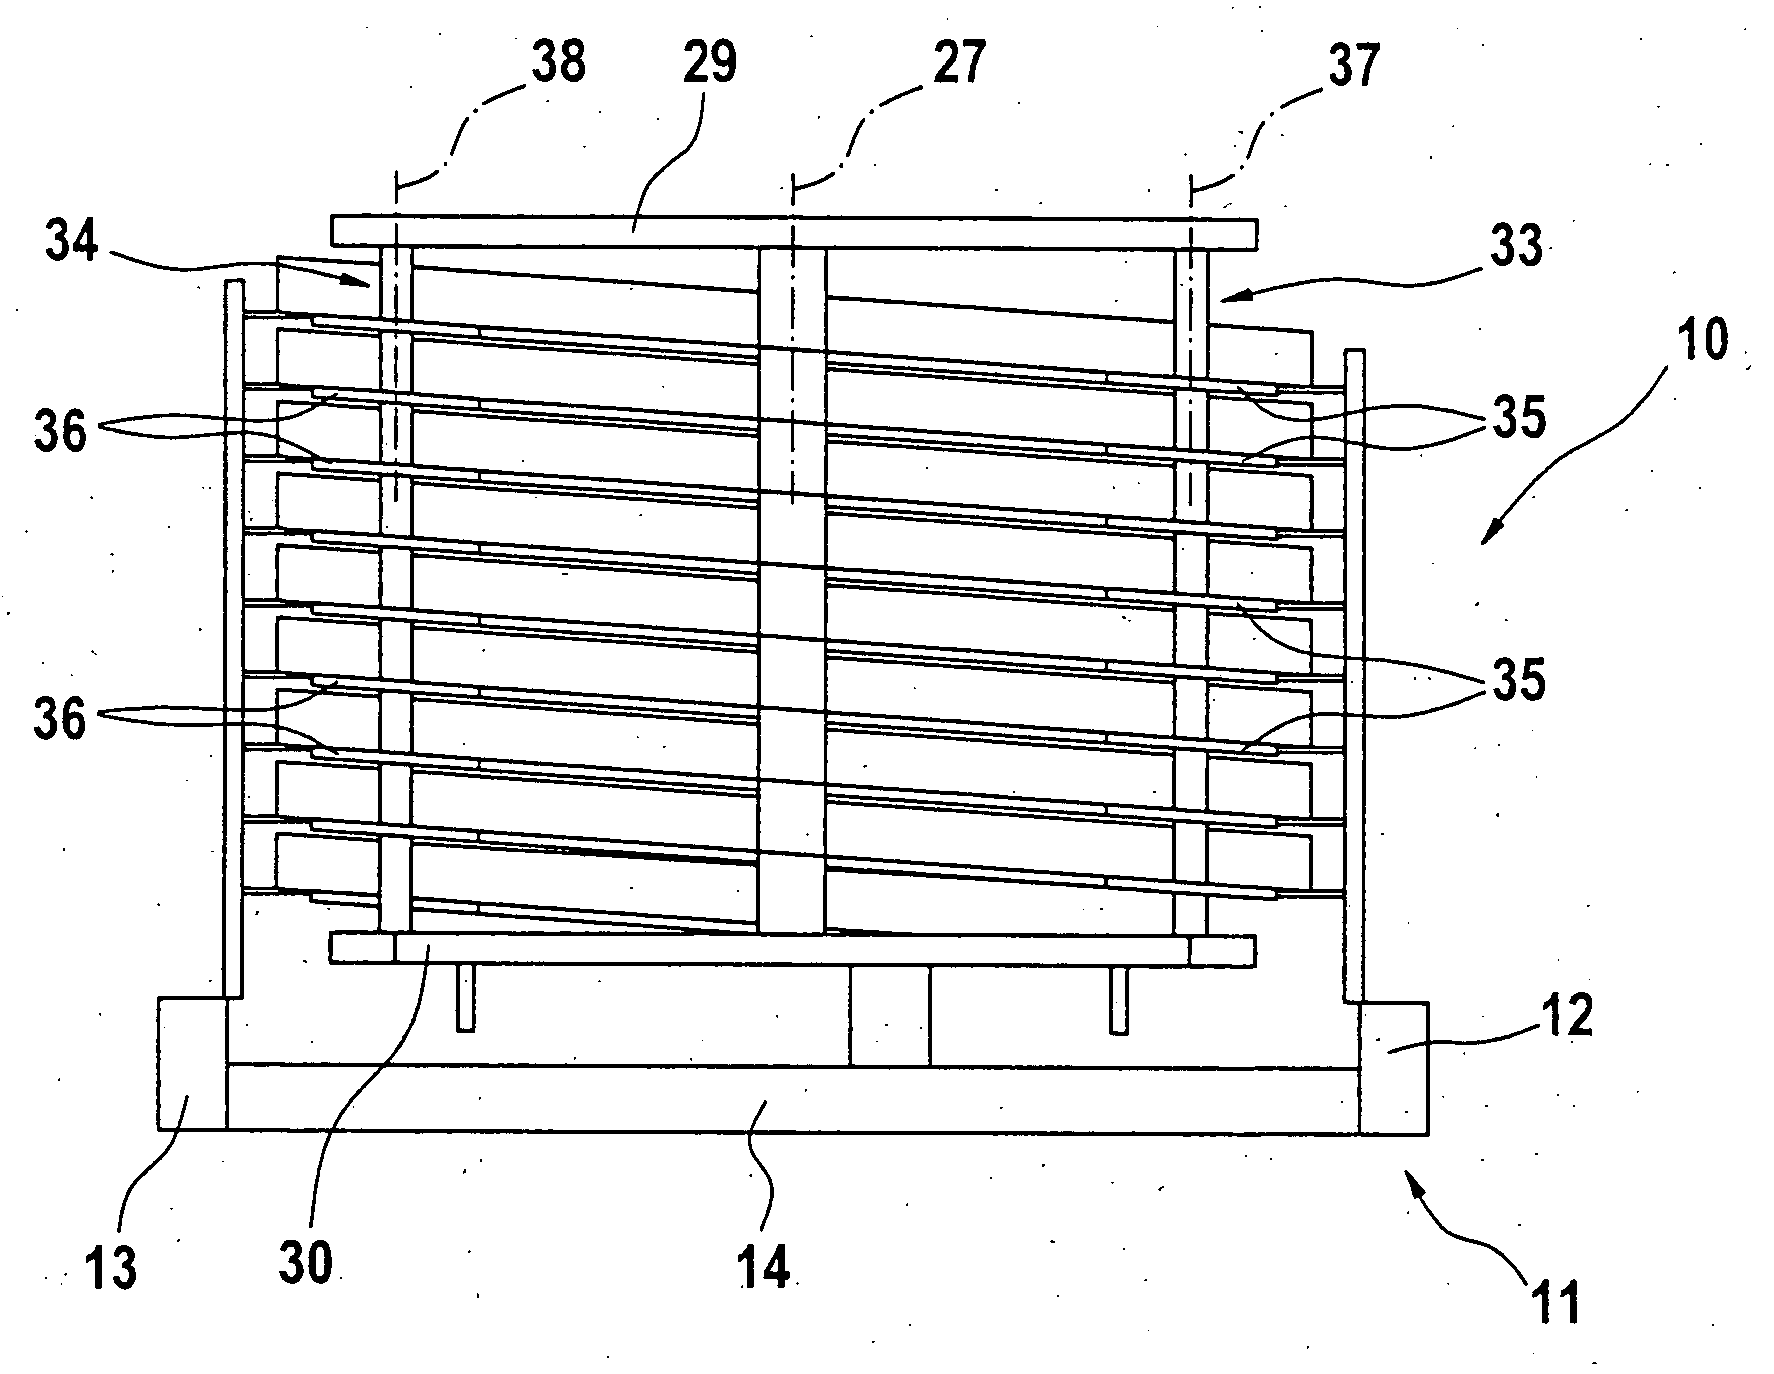 Storage device with variable storage capacity